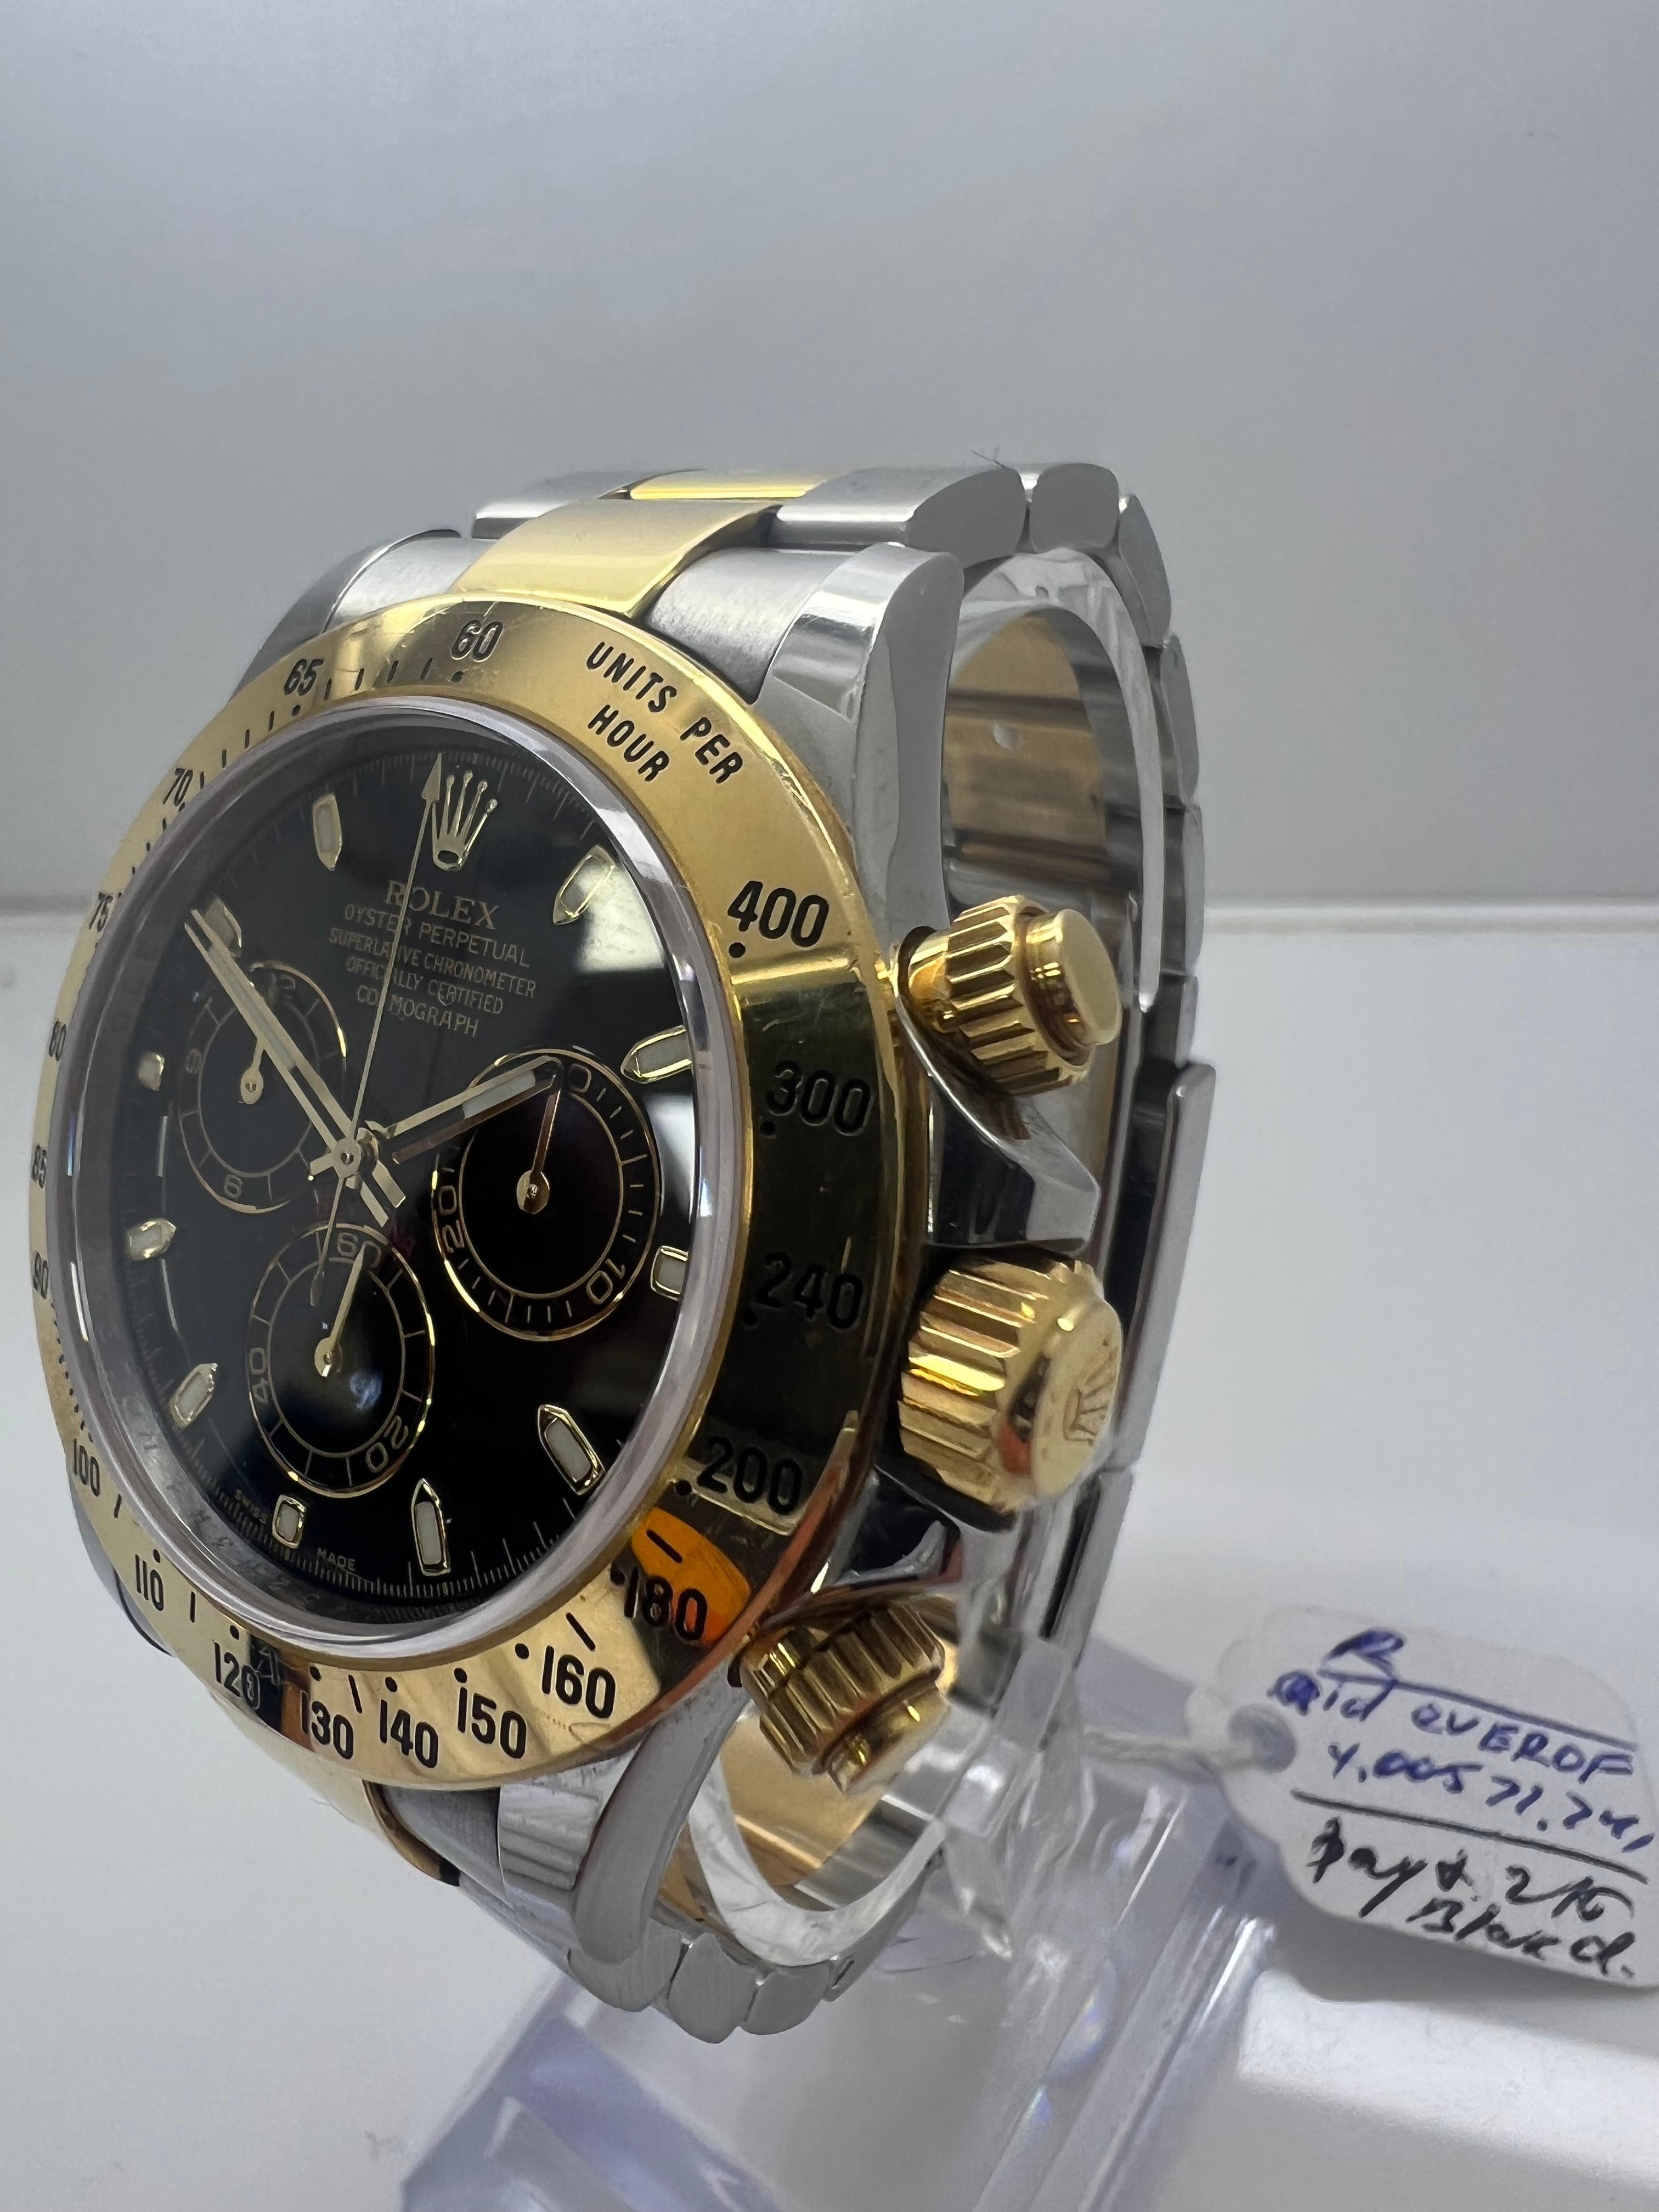 Rolex Cosmograph Daytona Men's Black Watch - 116503

Two tone yellow gold

Excellent condition

not polished

no box or papers

2 year warranty on movement

Free overnight shipping

Shop with confidemce 

Evita Diamonds